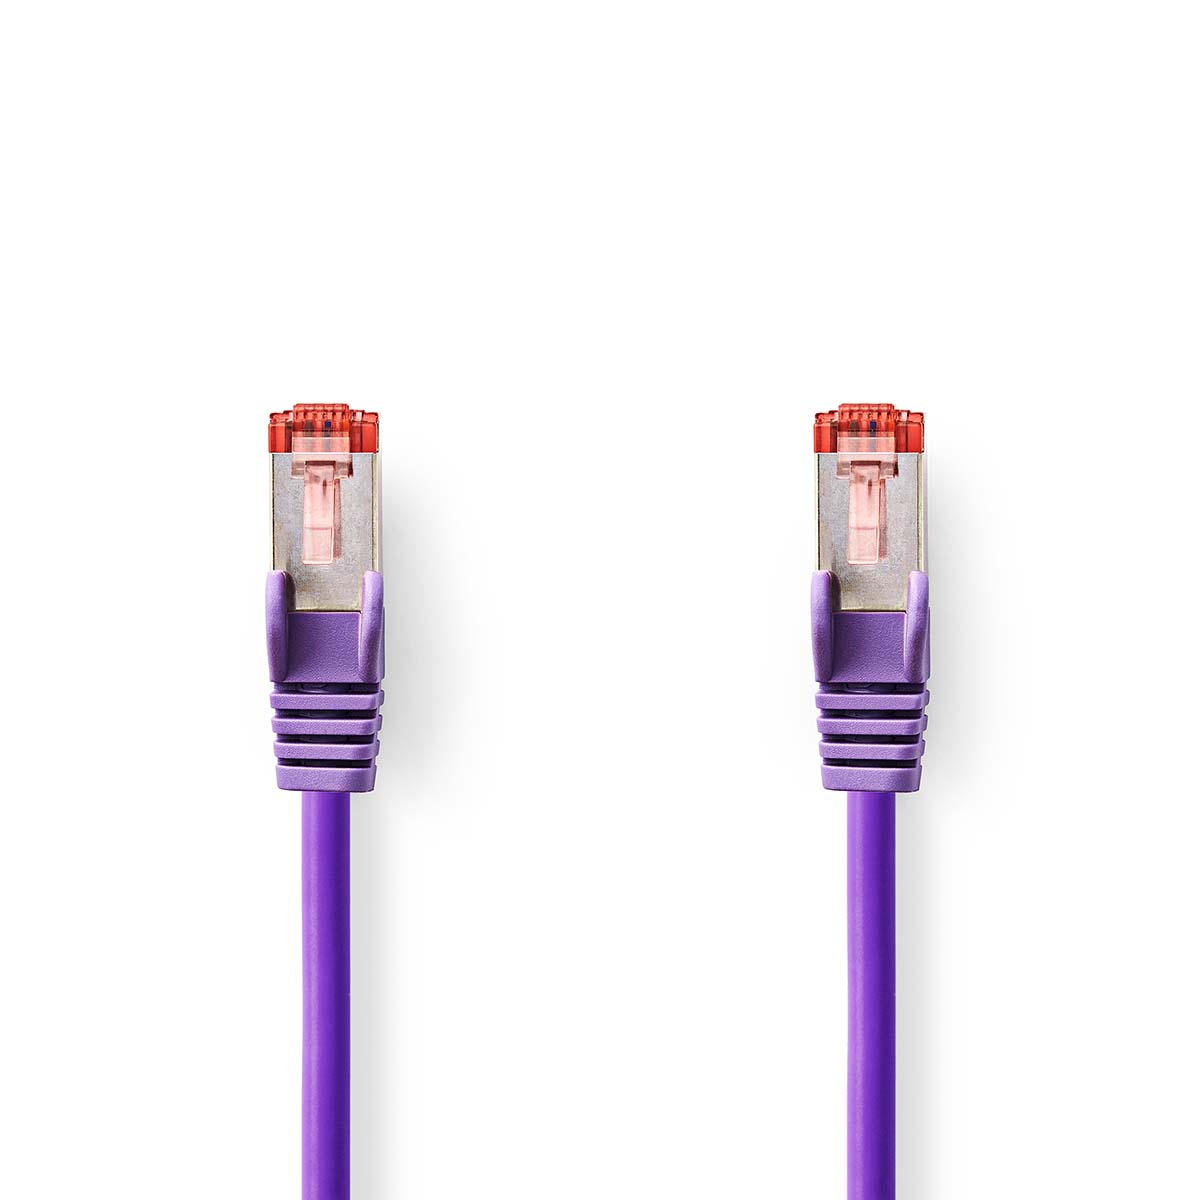 6 S/FTP Cable   20 m Red LSOH with Test Protocol LINDY Cat 